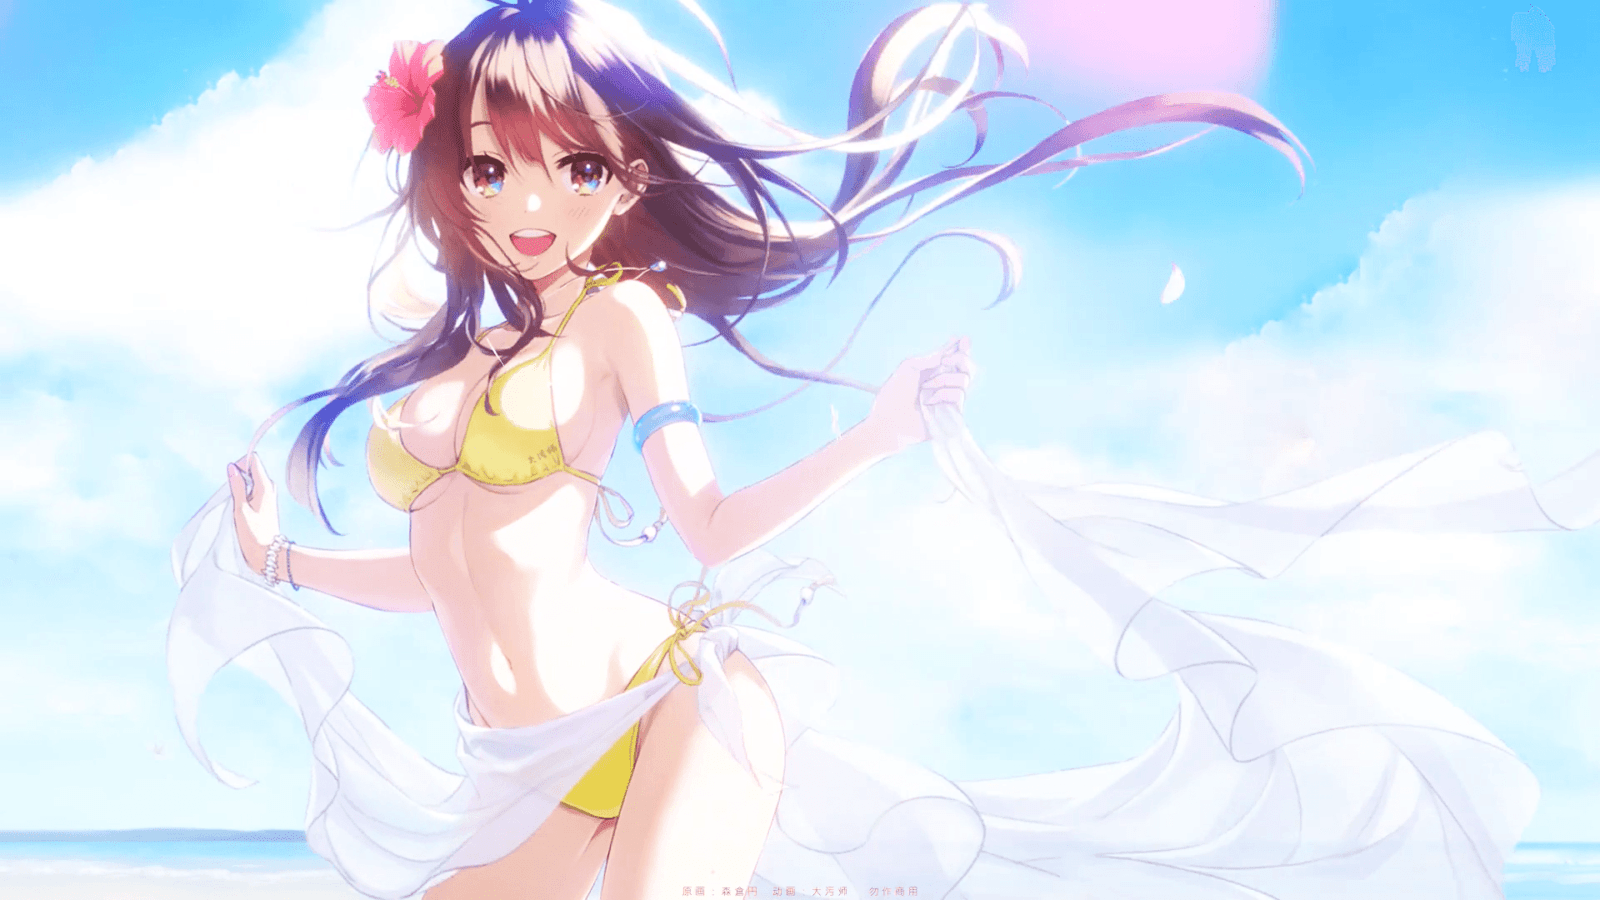 LiveWallpapers4Free.com | Cute Summer Girl Anime - Free Live Wallpaper